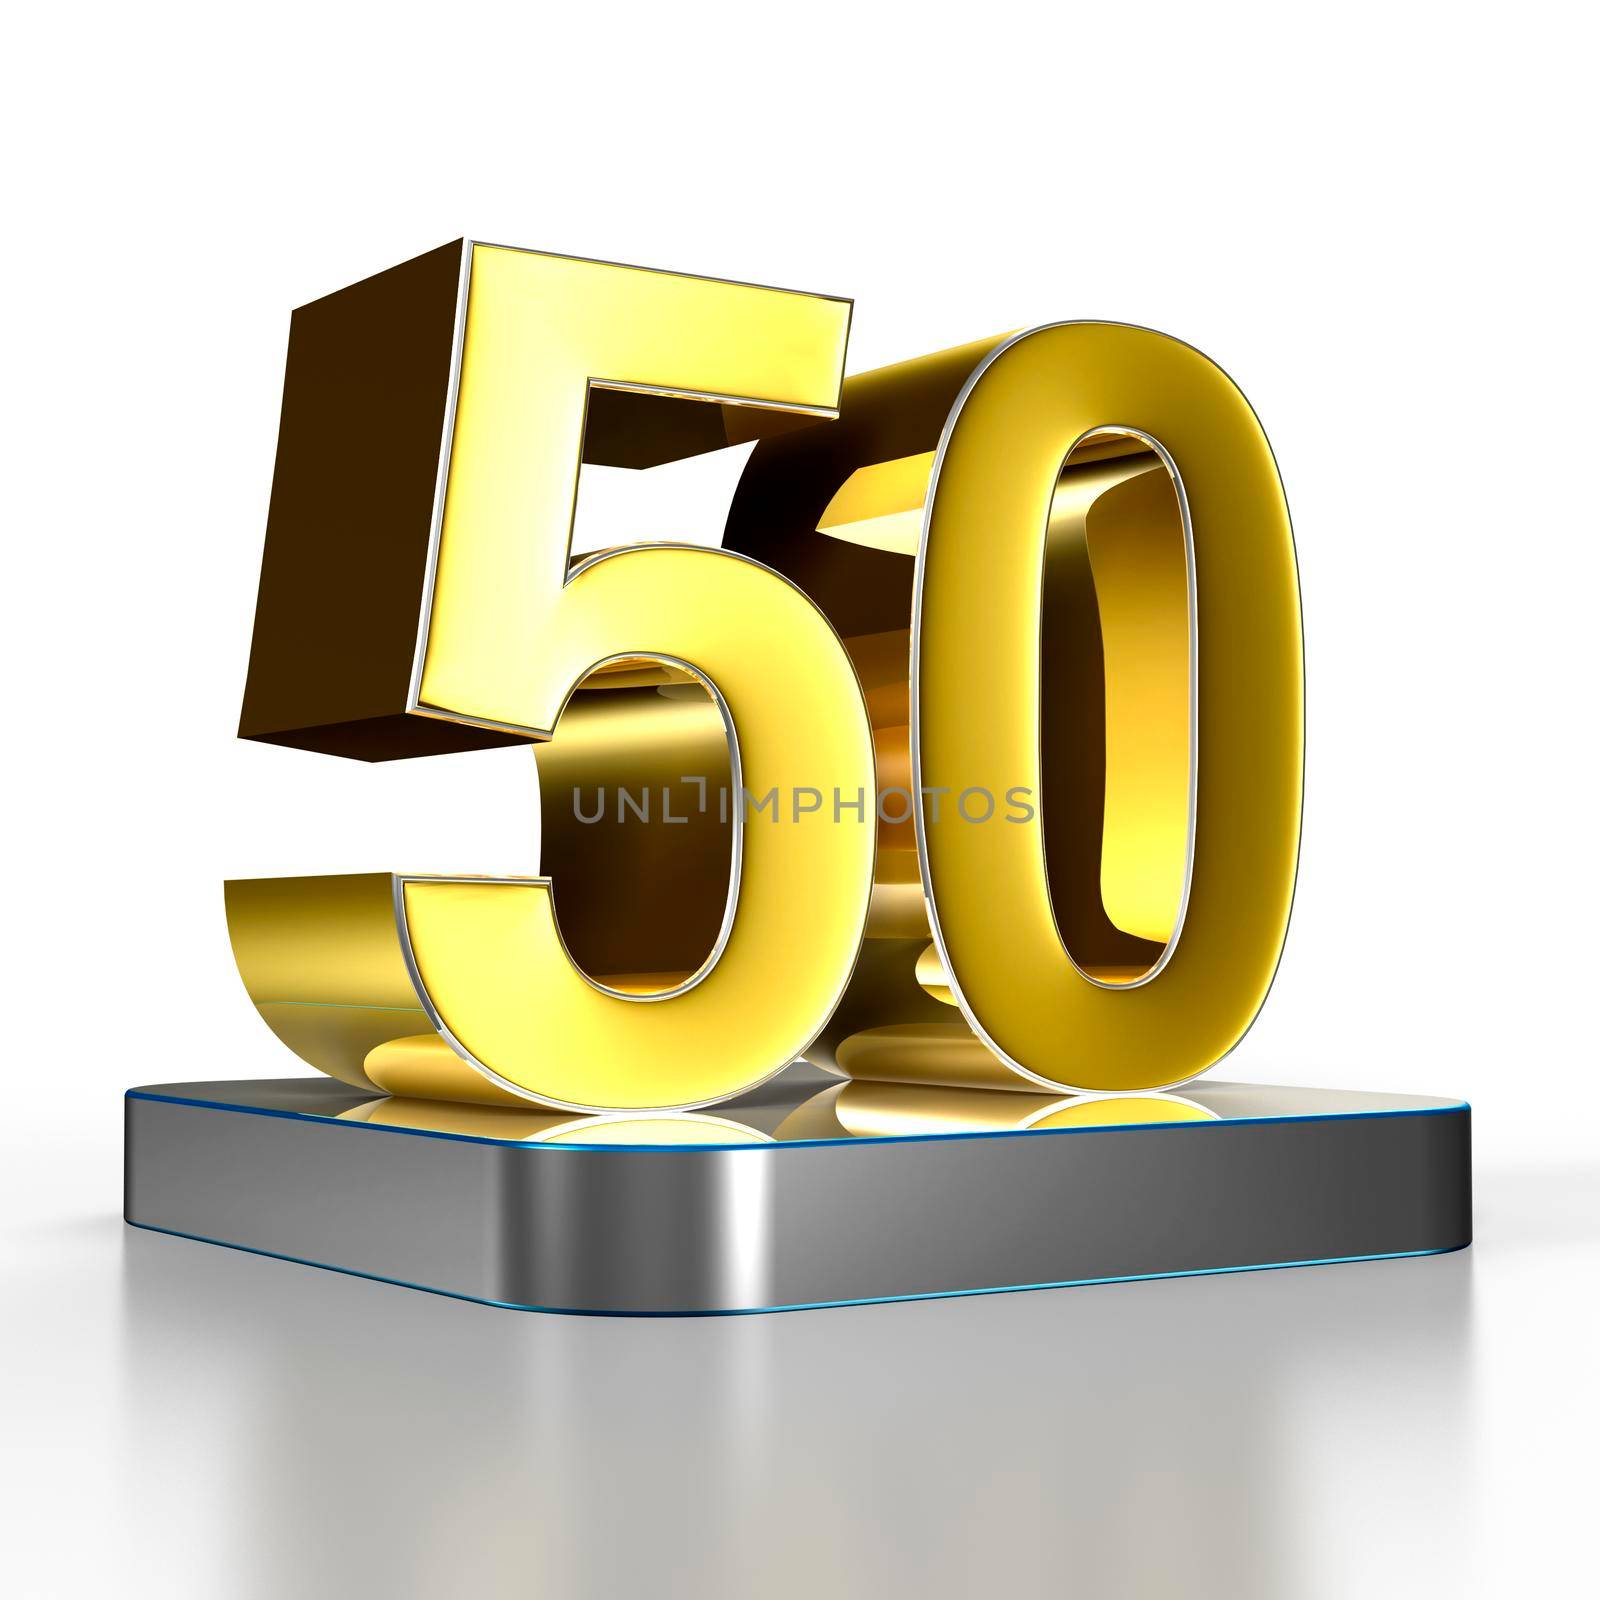 Numbers 50 gold are on a stainless steel platform illustration 3D rendering with clipping path.